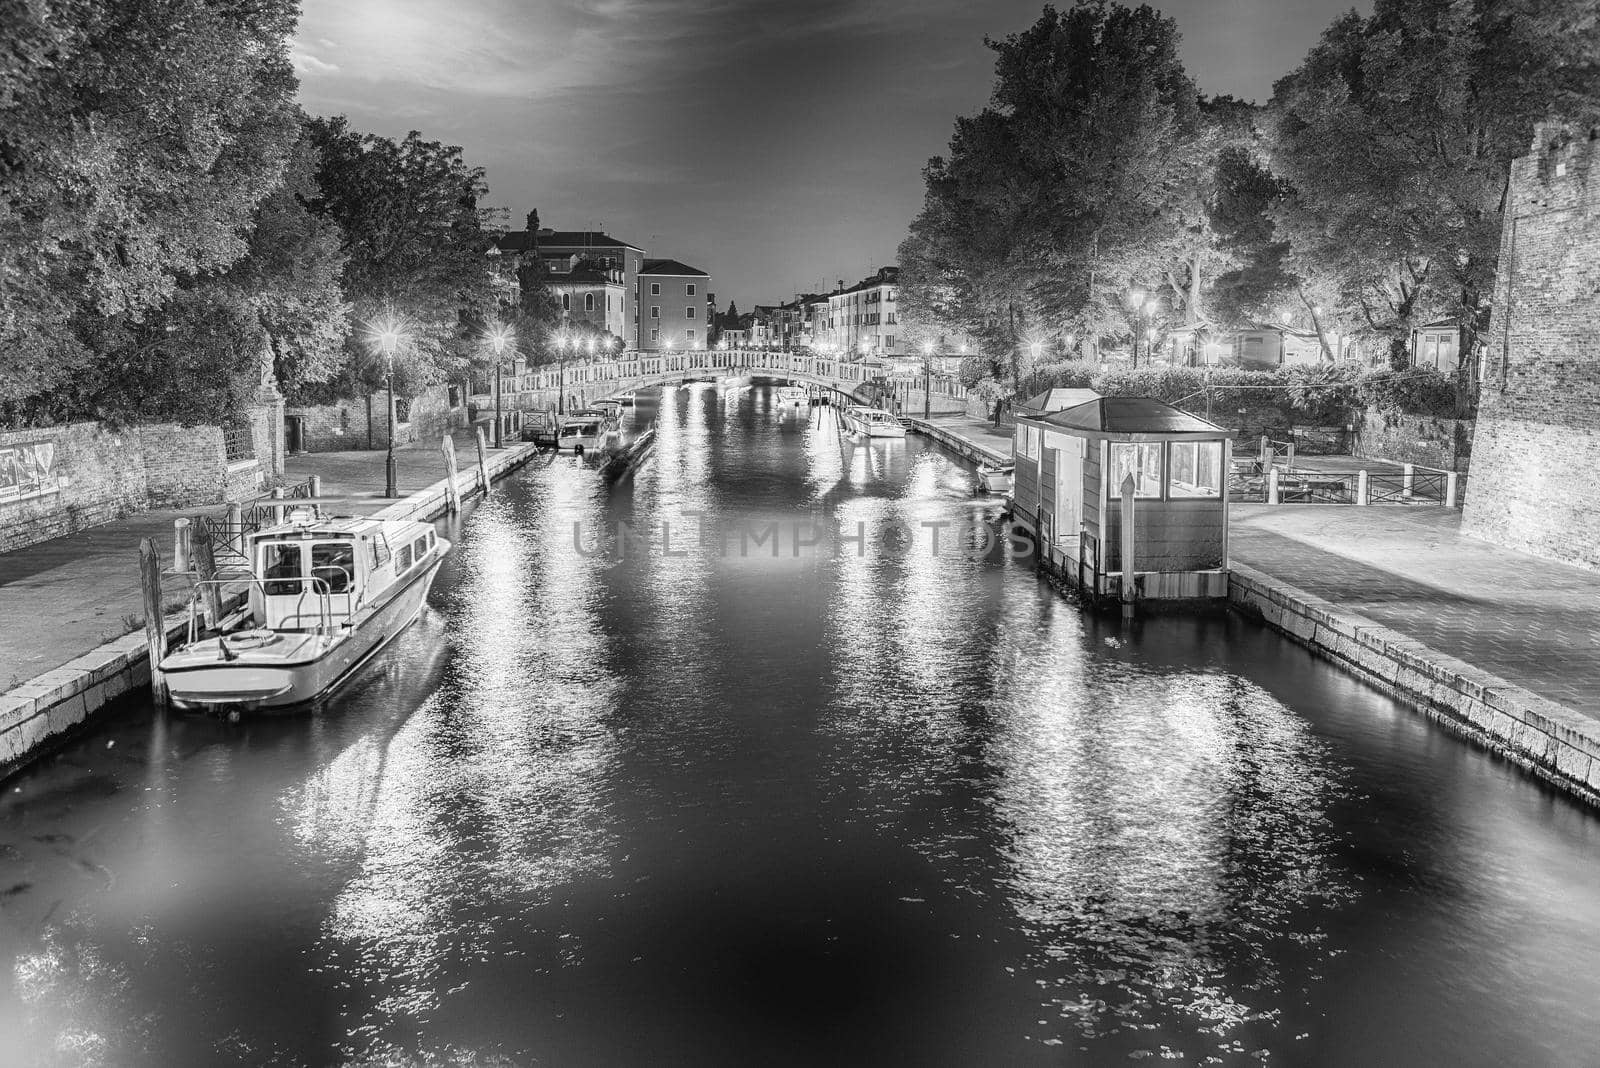 View over the picturesque canal Rio Novo at night, in Santa Croce district of Venice, Italy